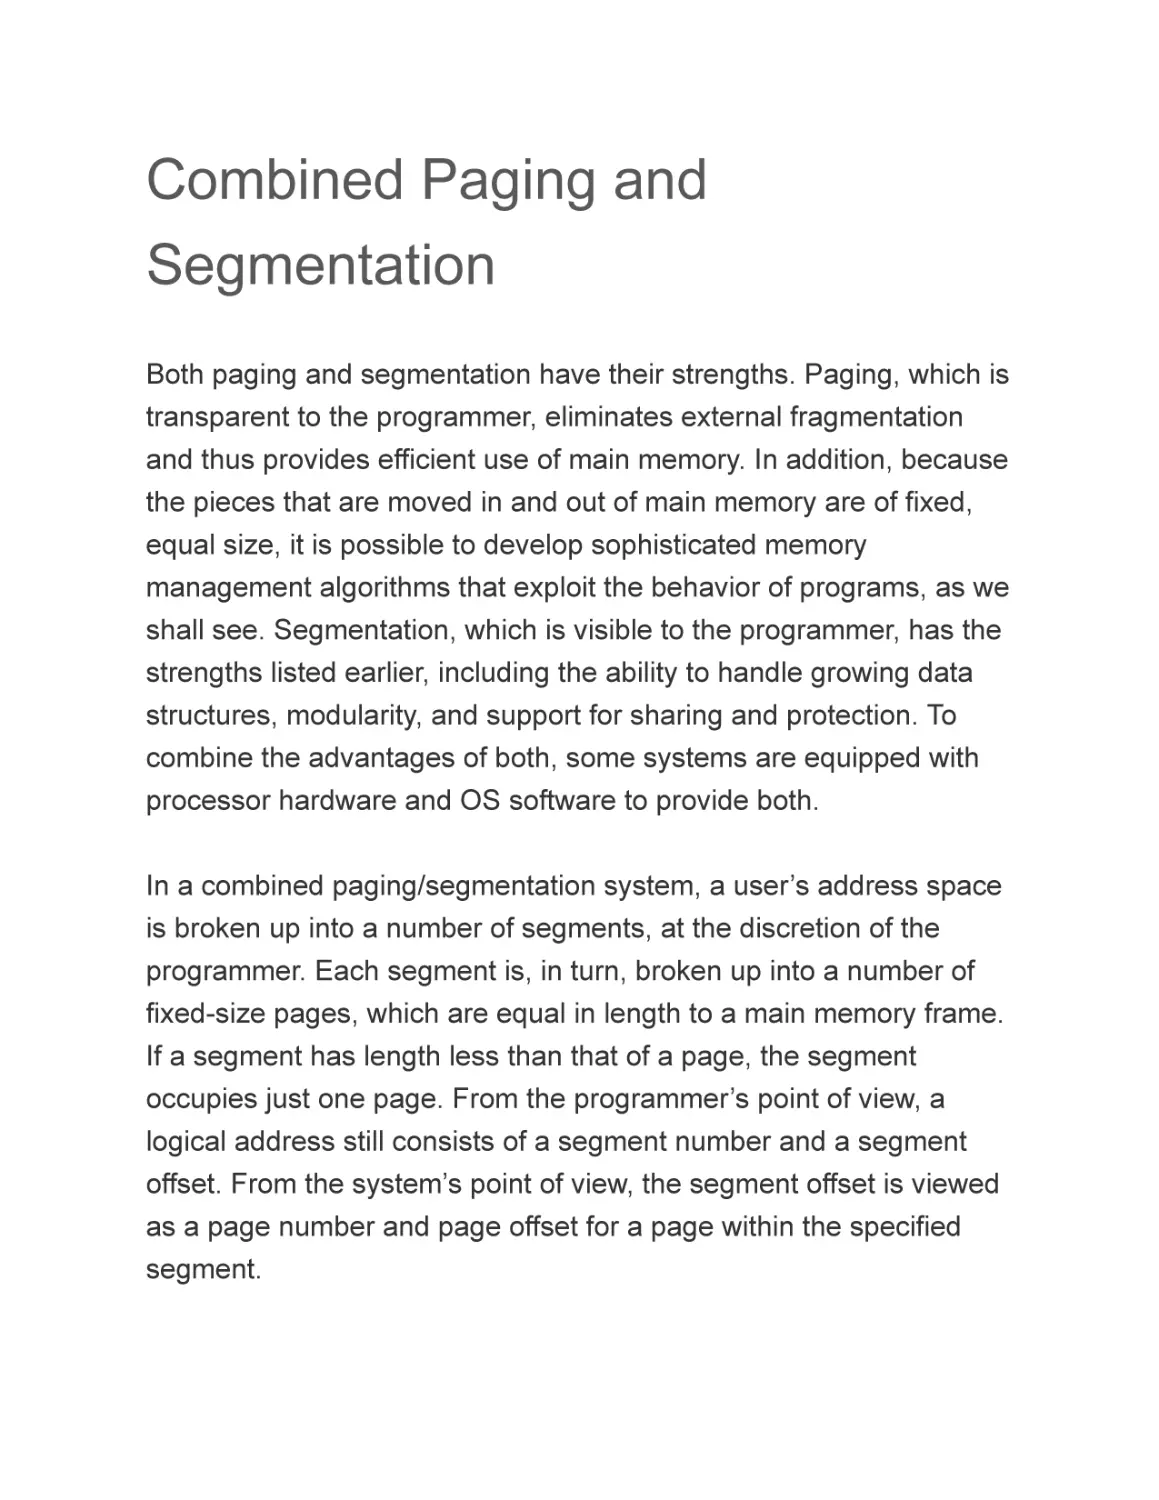 Combined Paging and Segmentation